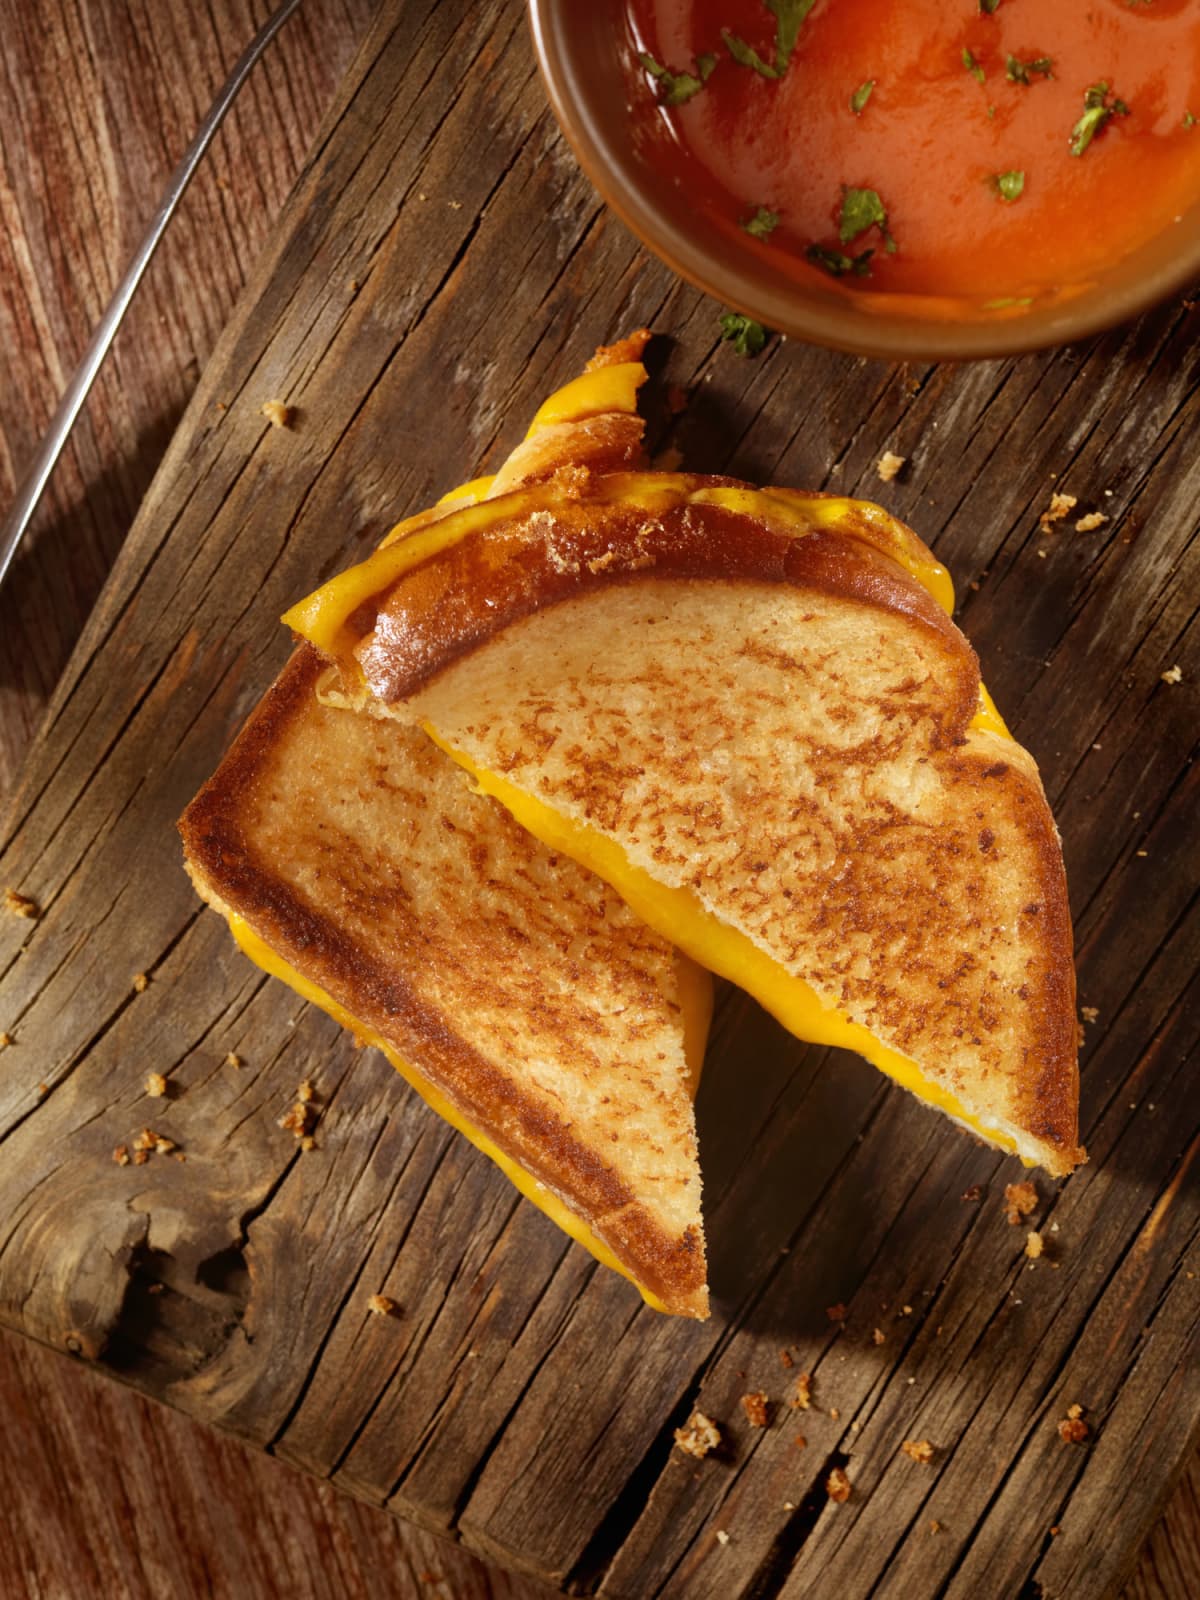 Grilled Cheddar Cheese Sandwich with Tomato Soup -Photographed on Hasselblad H3D2-39mb Camera